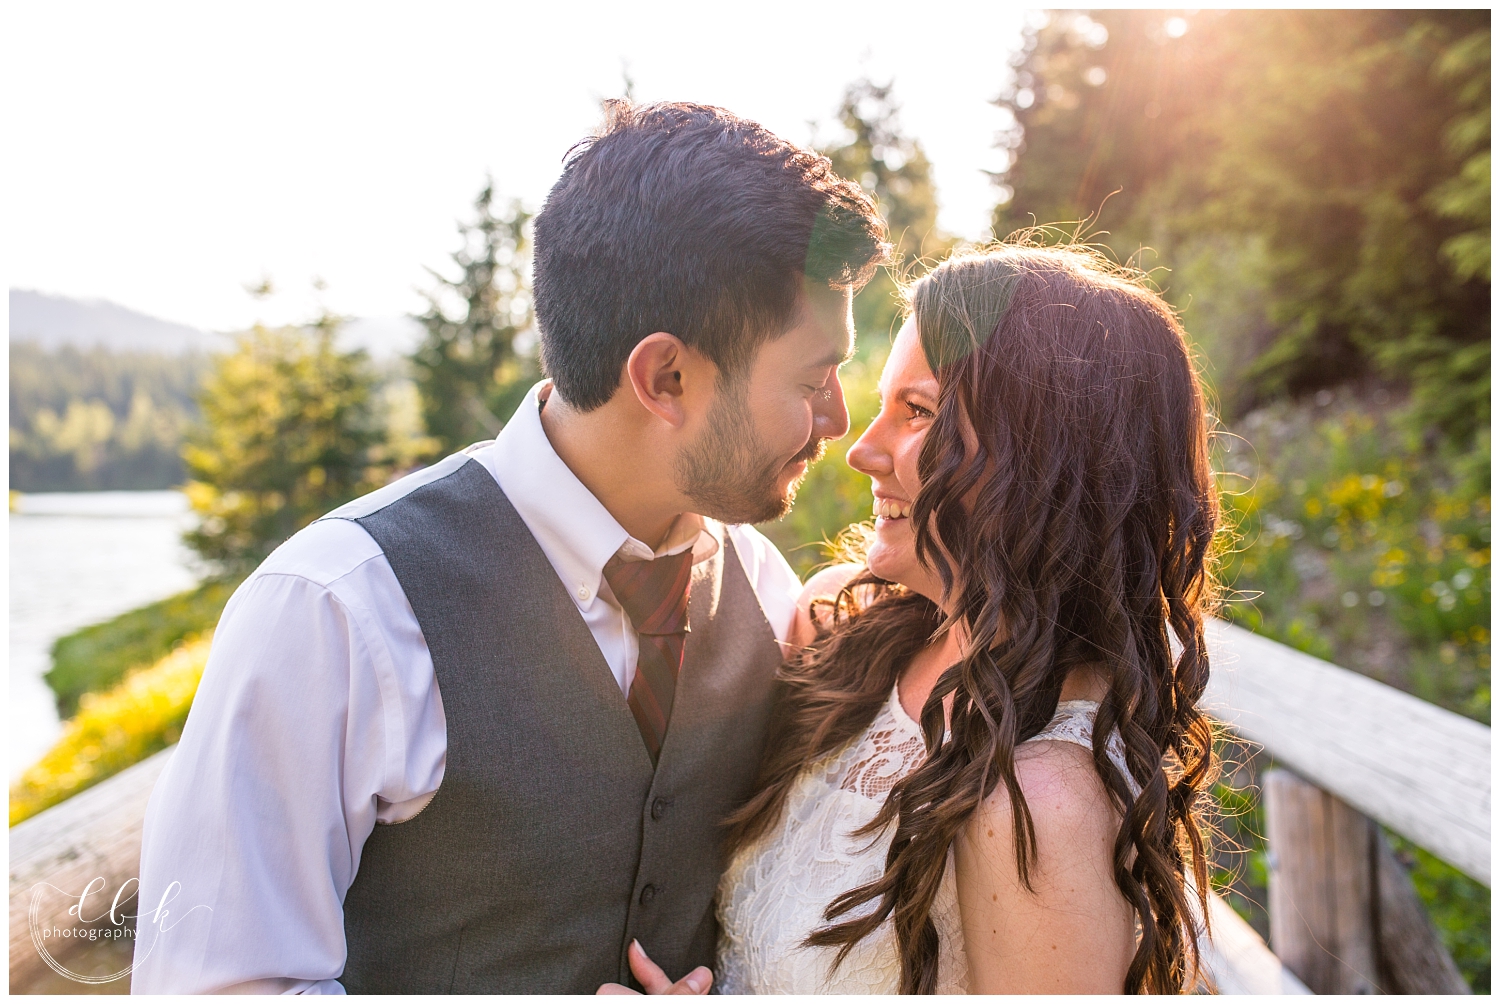 Gold Creek Pond summer engagement portraits by DBK Photography | Seattle wedding photographer